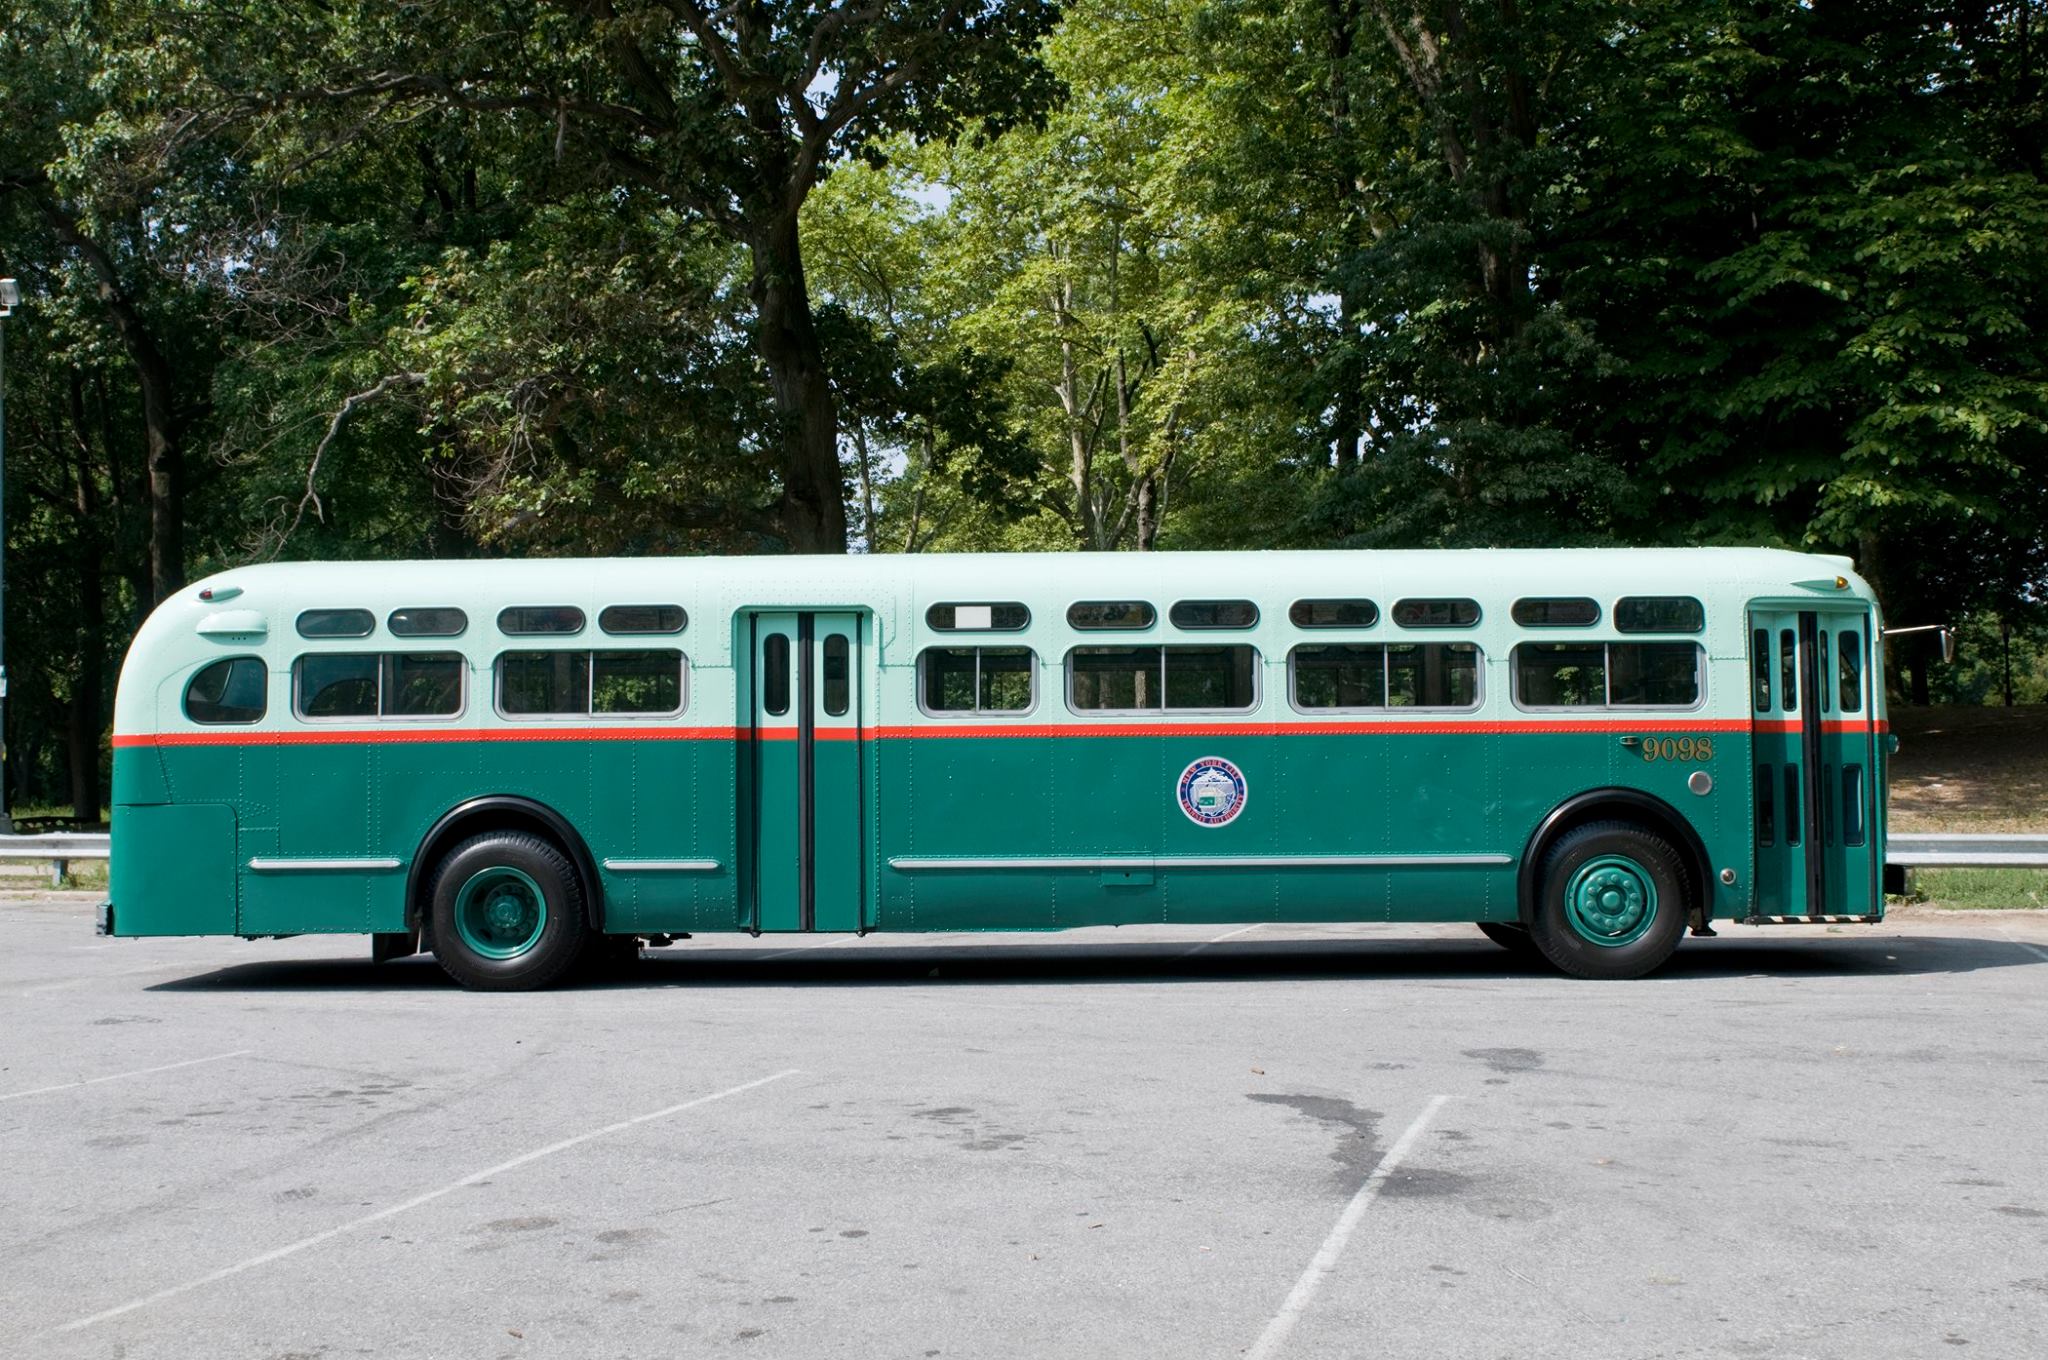 Vintage bus with two-tone green color scheme